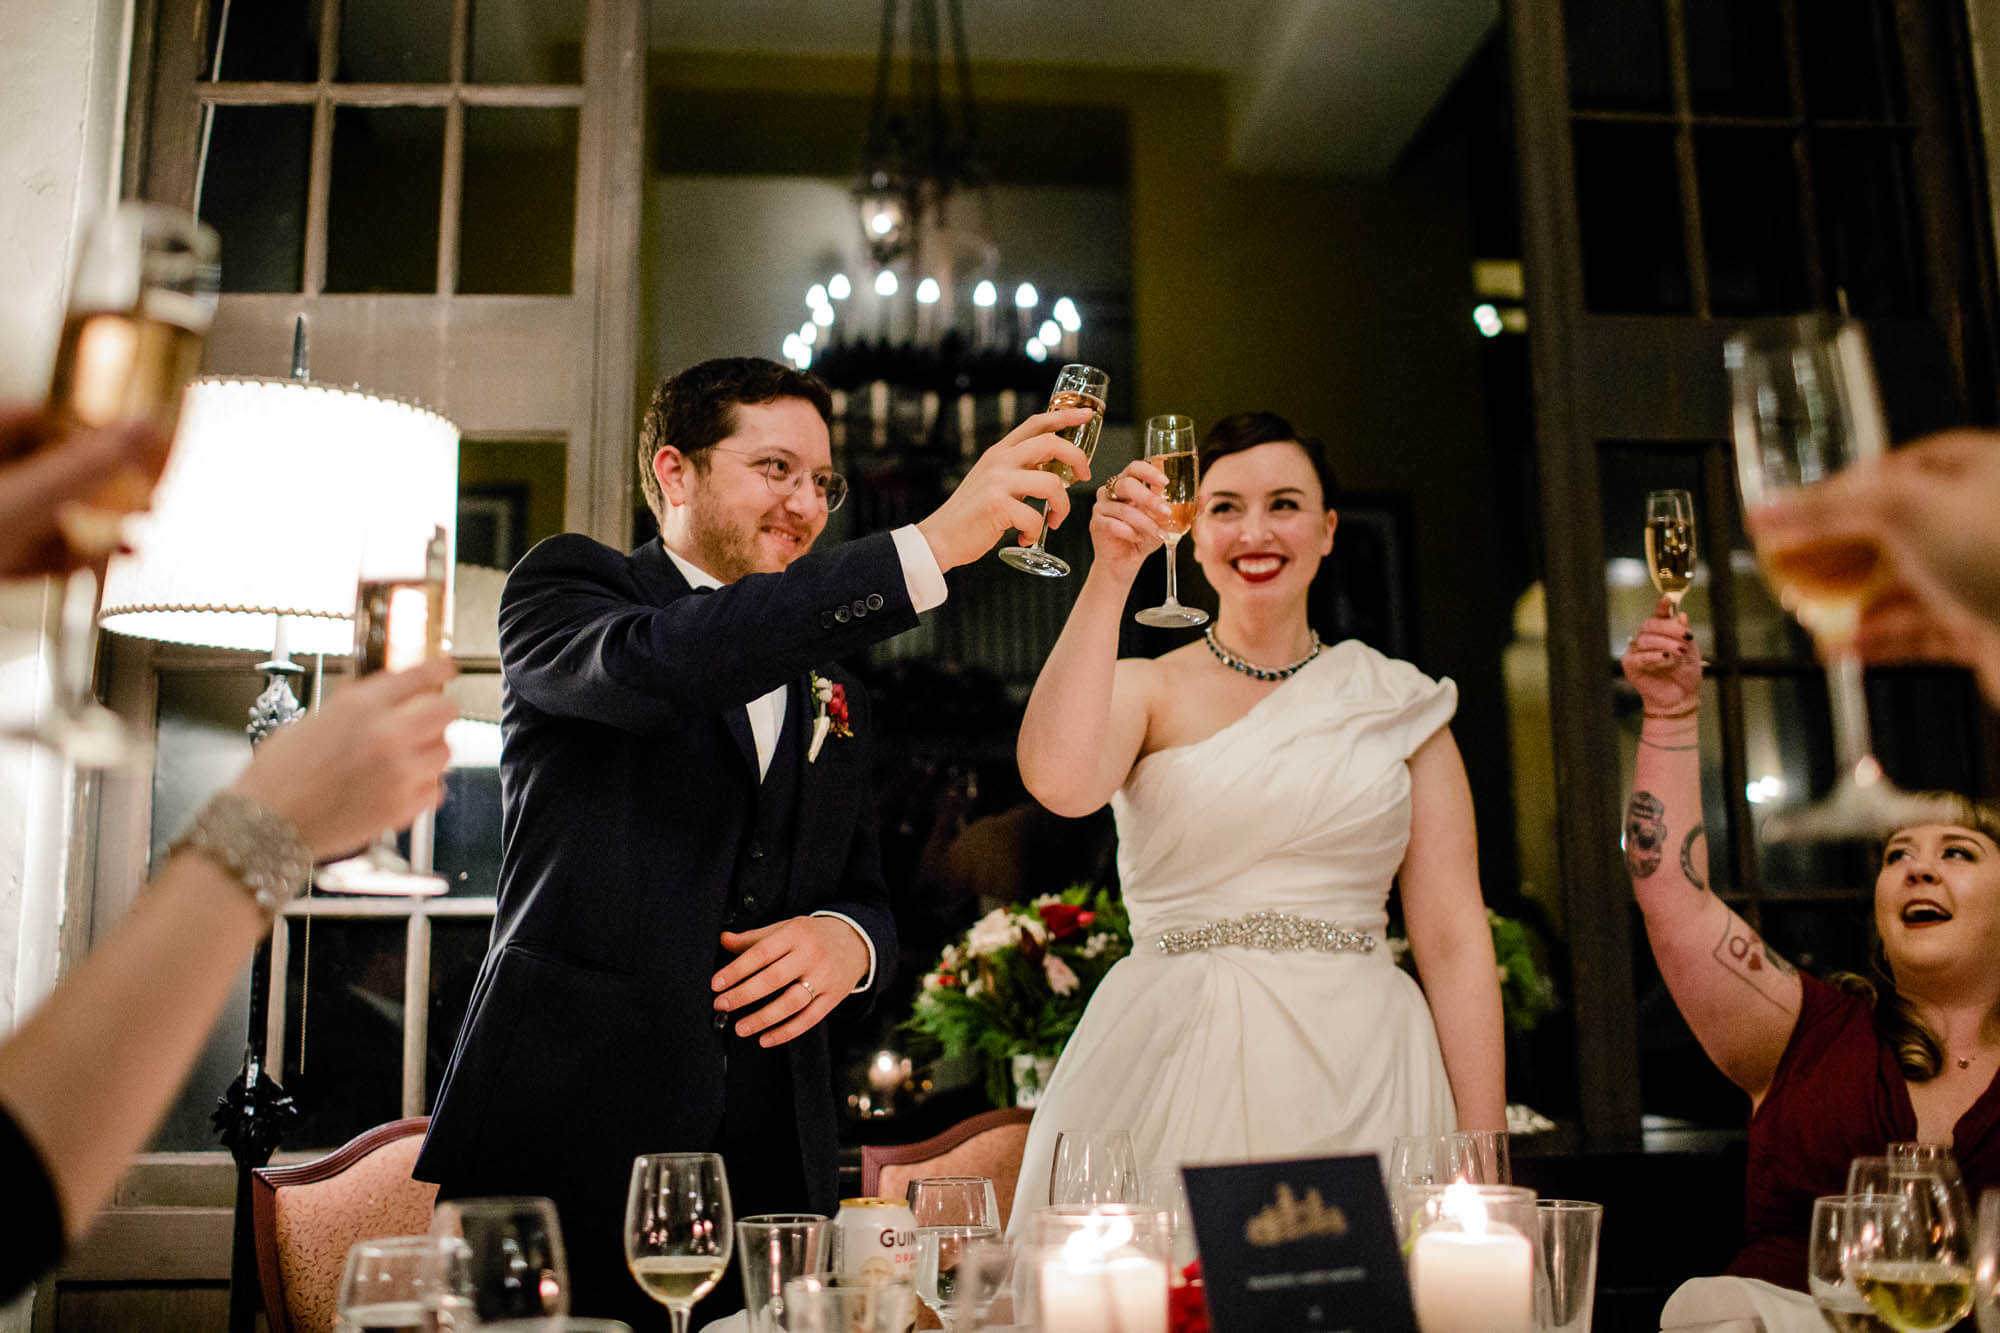 Bride and groom raise their glasses to their guests during their wedding reception